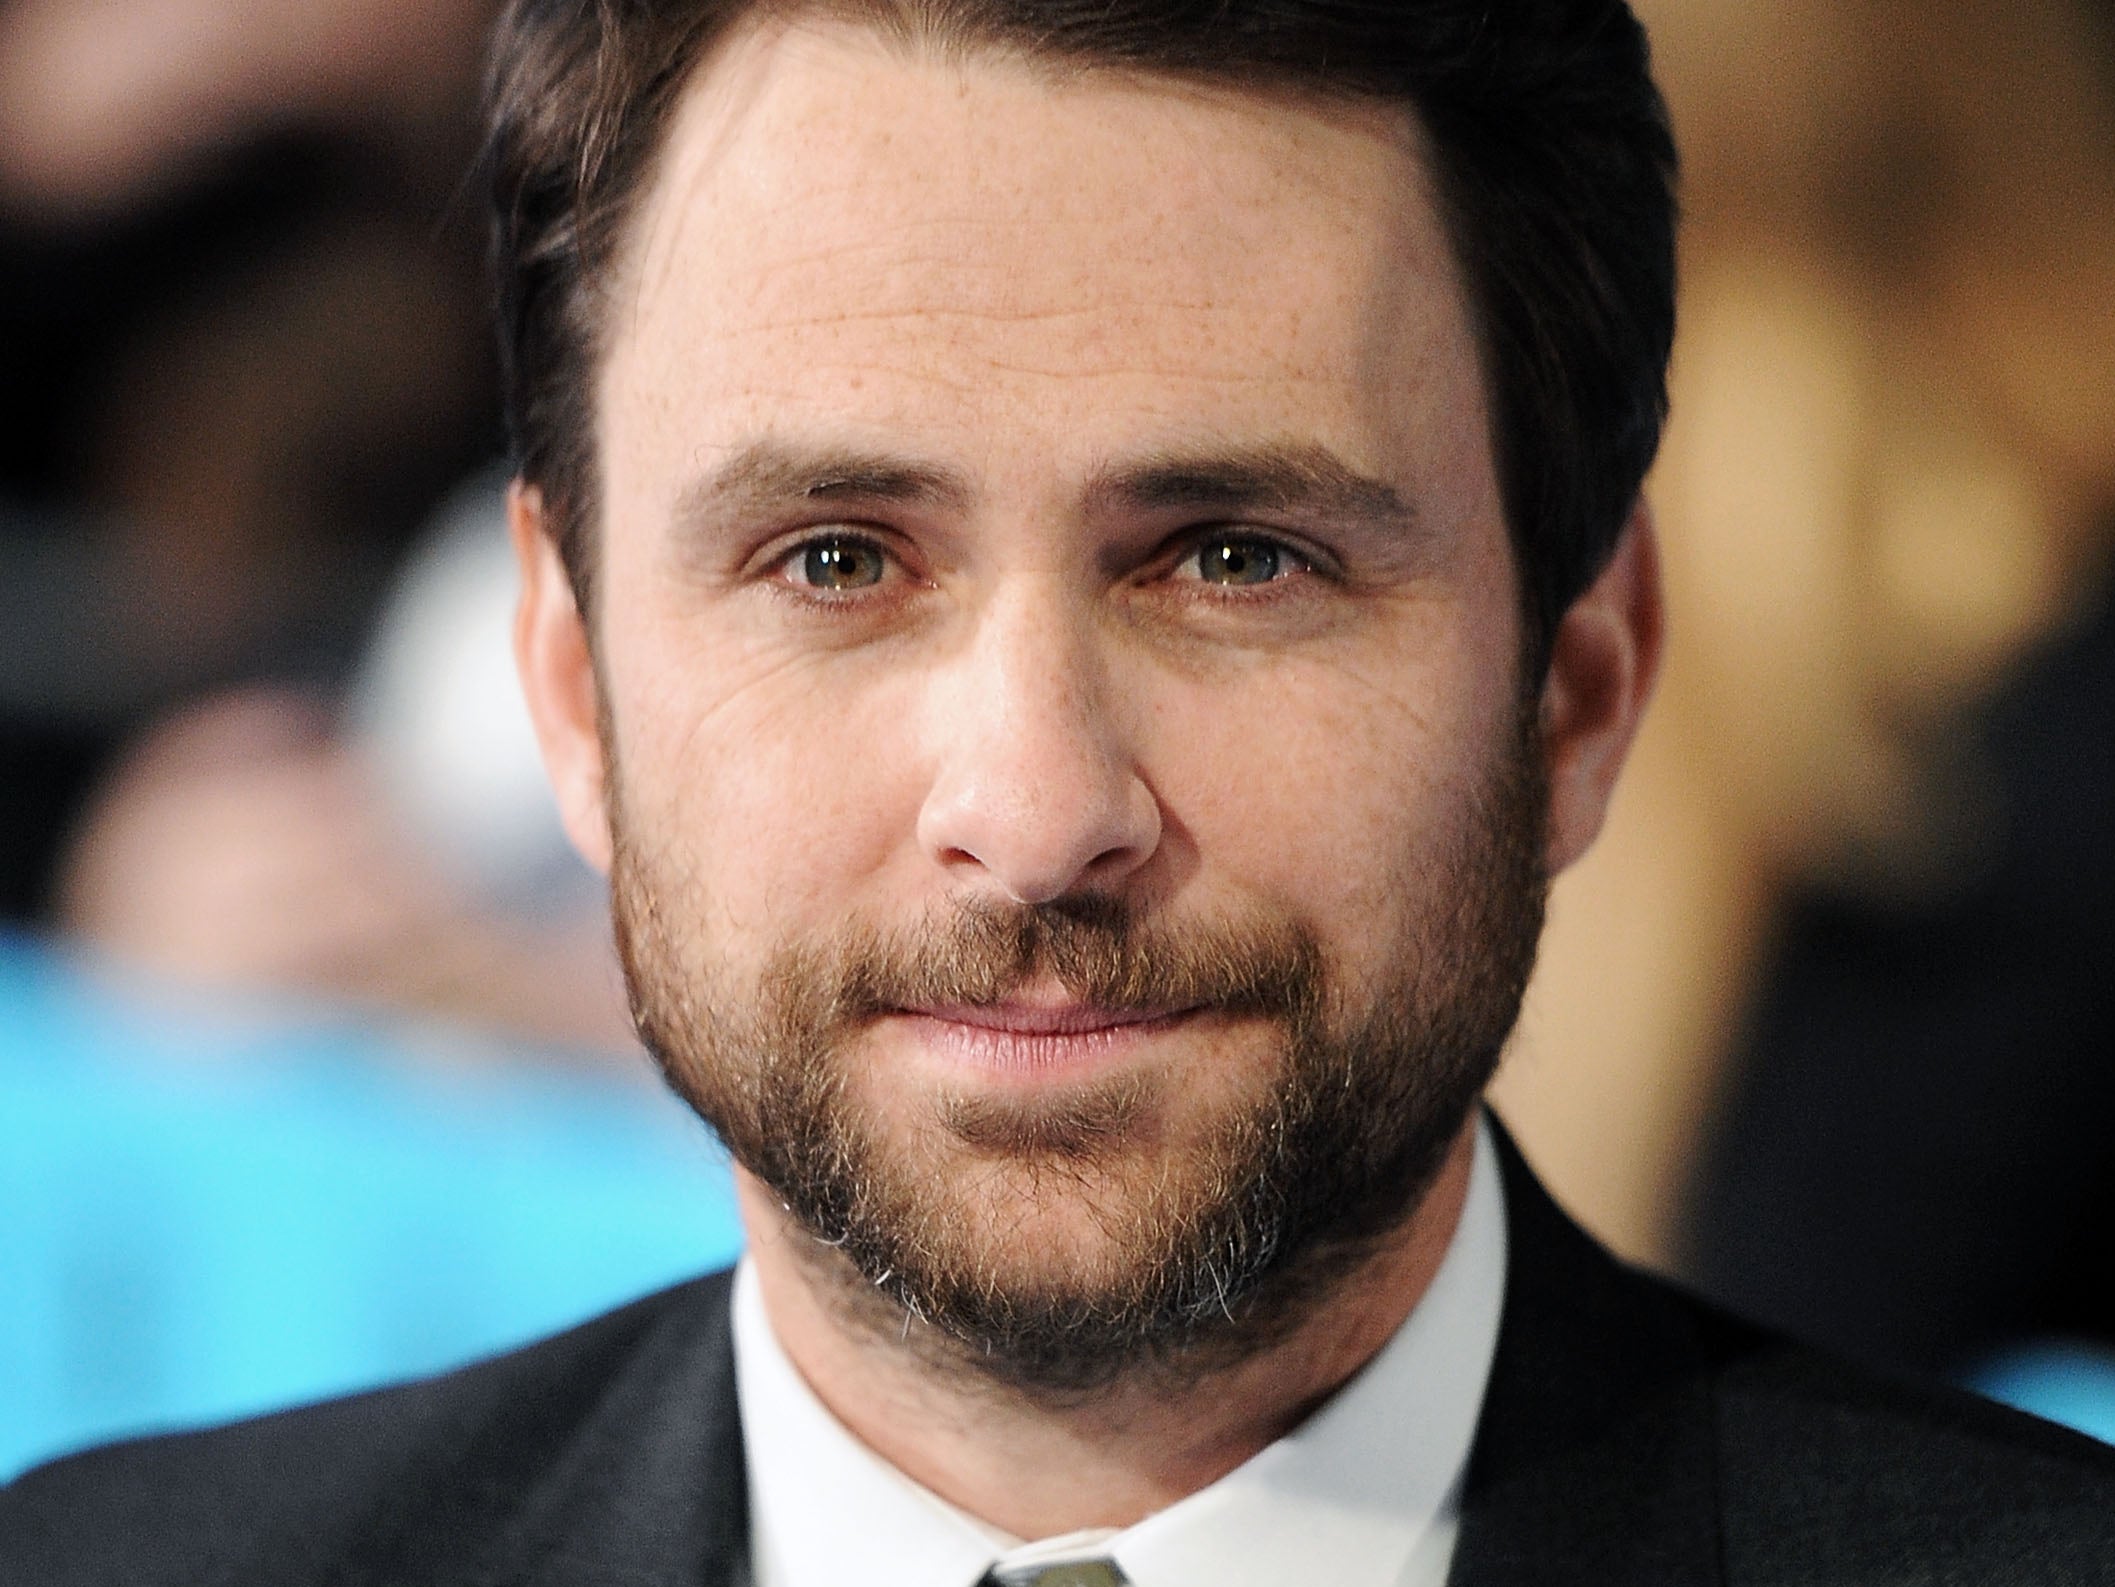 The Mad Hamster — After learning Charlie Day is casted as Luigi in